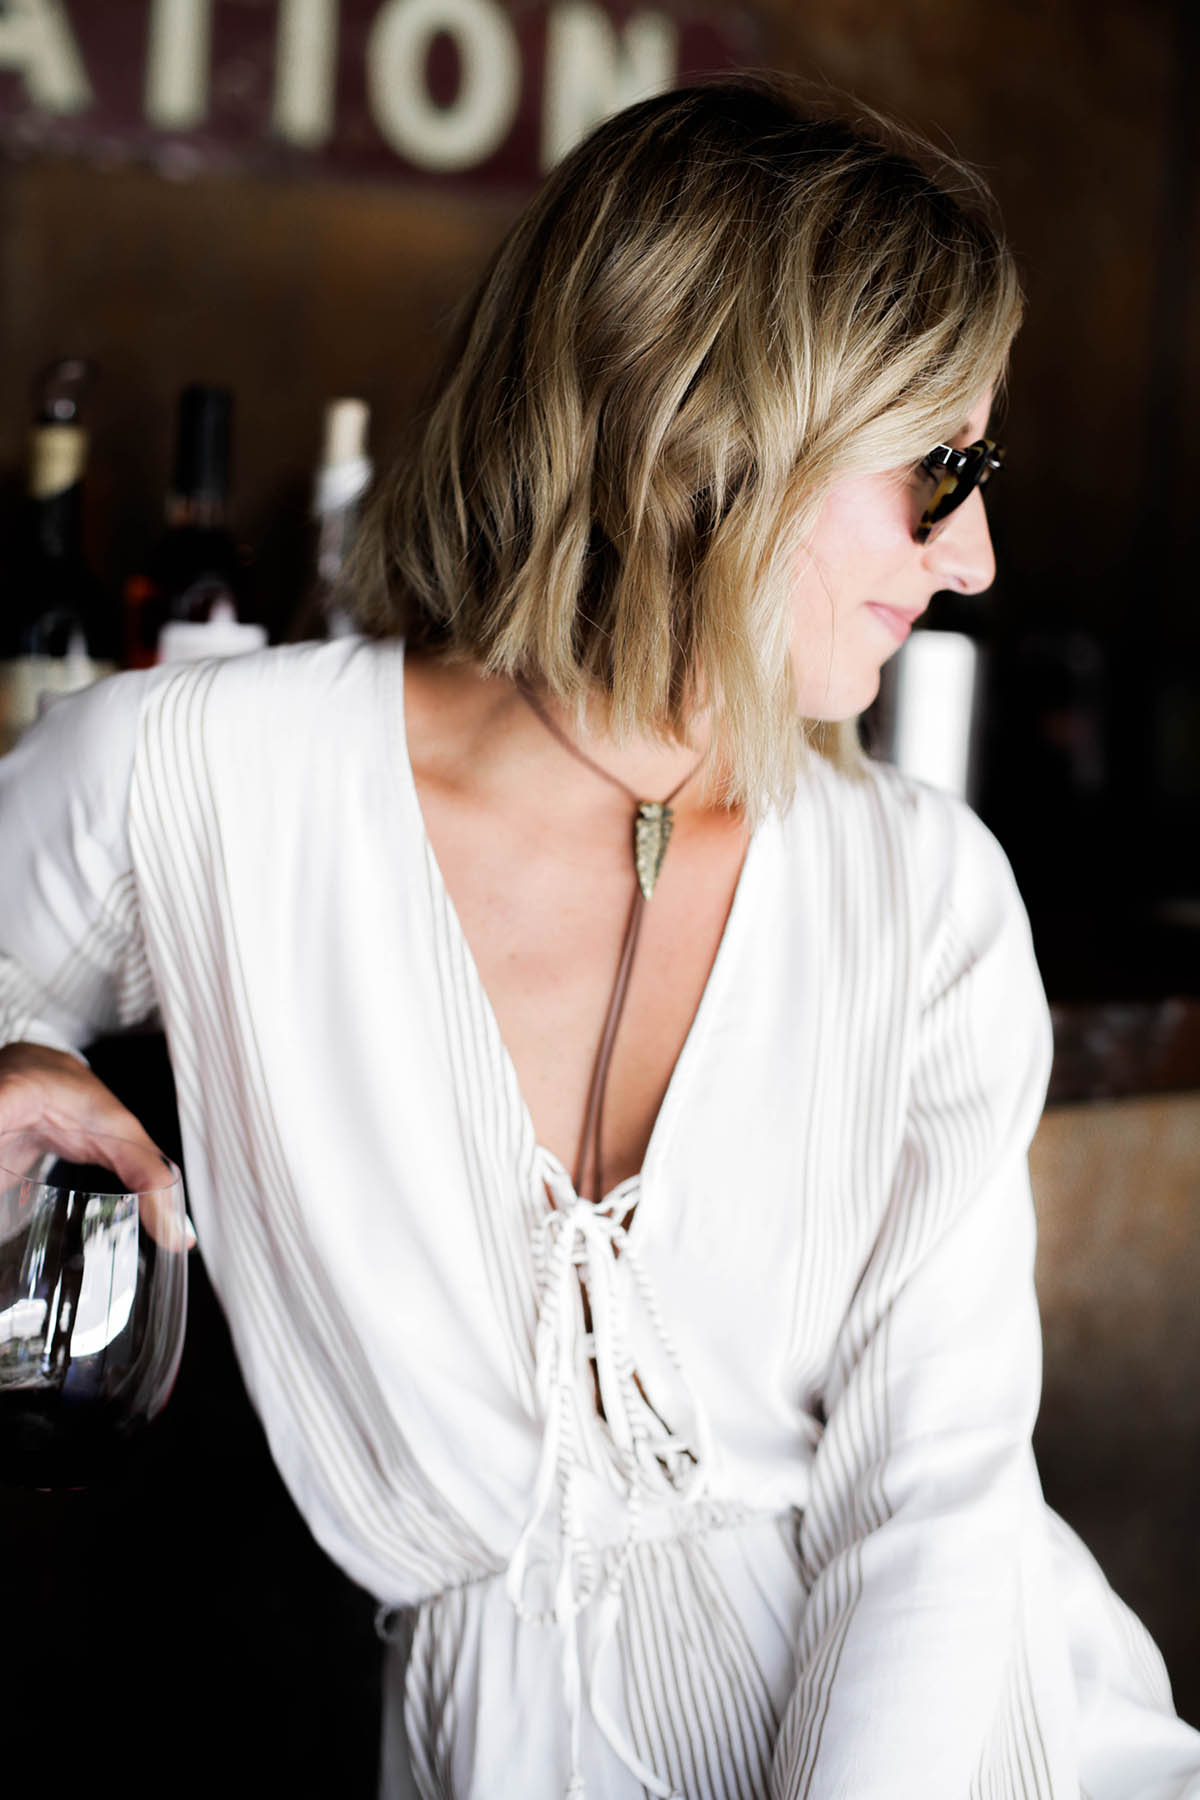 wine tasting outfit faithfull the brand romper at tank garage winery